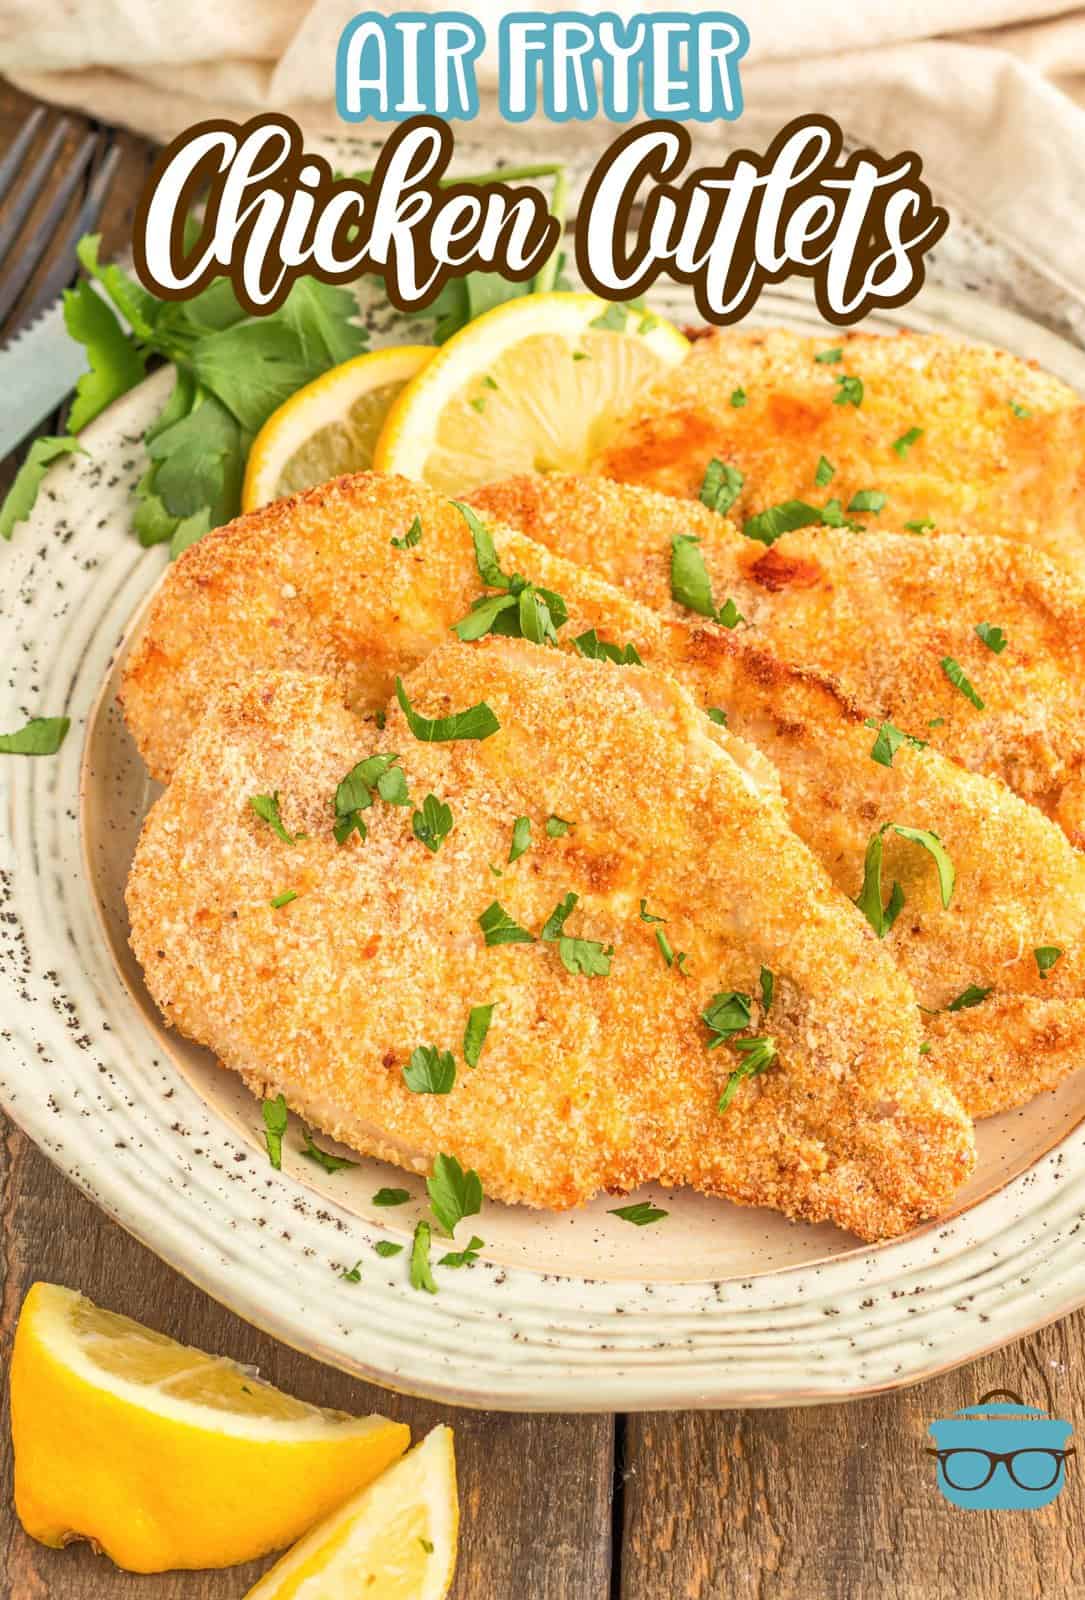 Pinterest image of layered Air Fryer Chicken Cutlets on plate with lemon wedges.